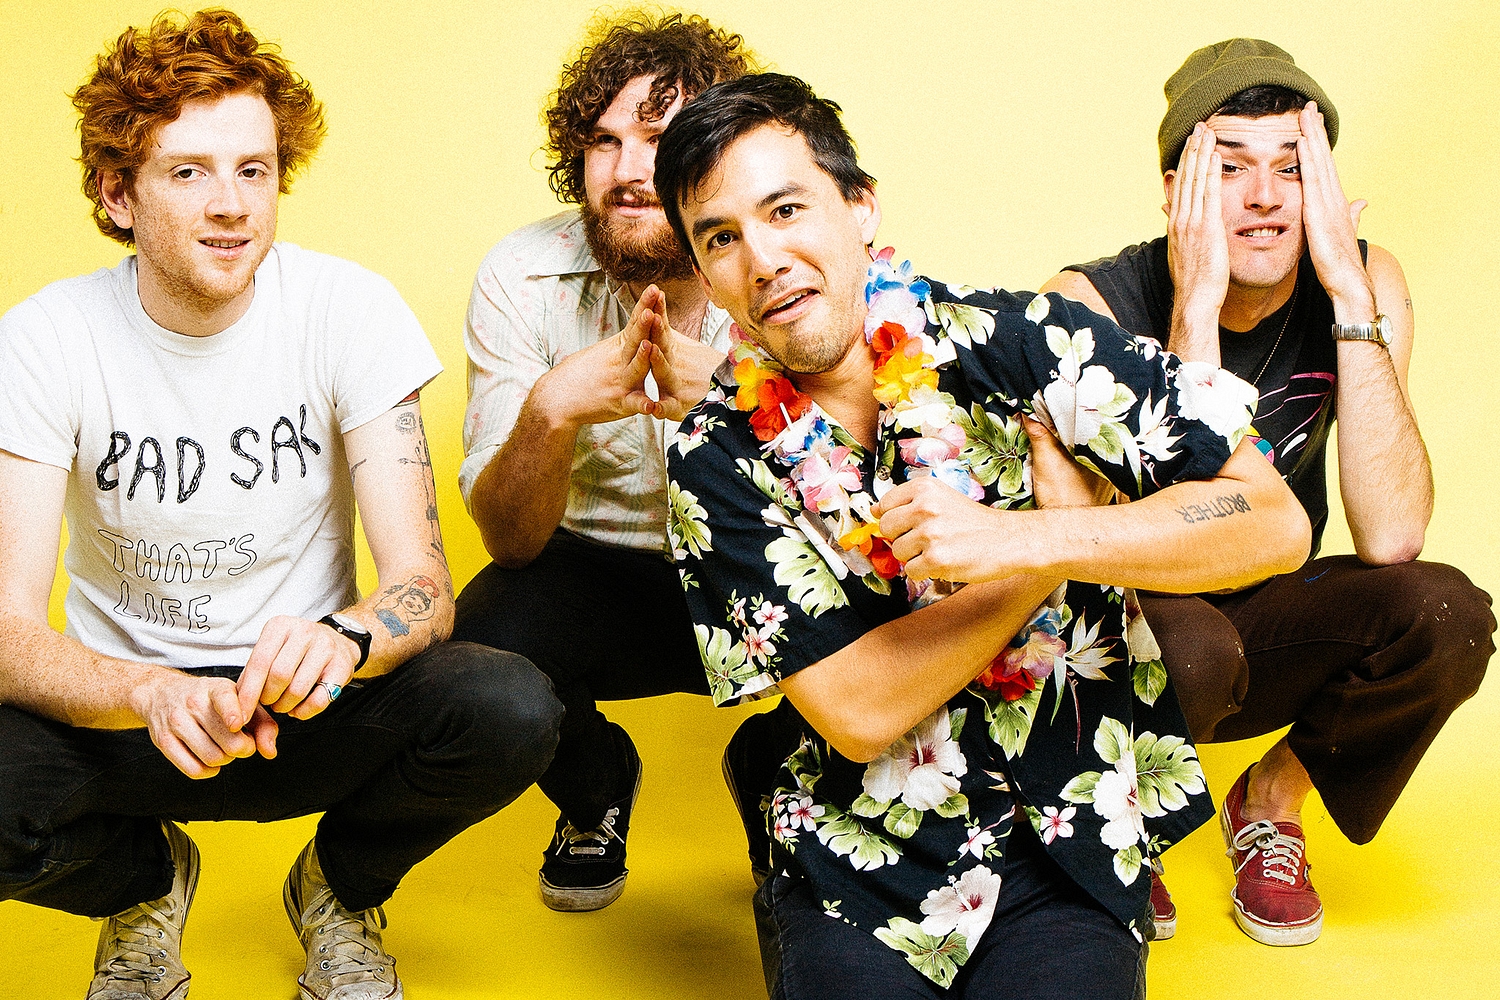 FIDLAR: “Just do whatever you want. If you wanna try it, fucking try it”